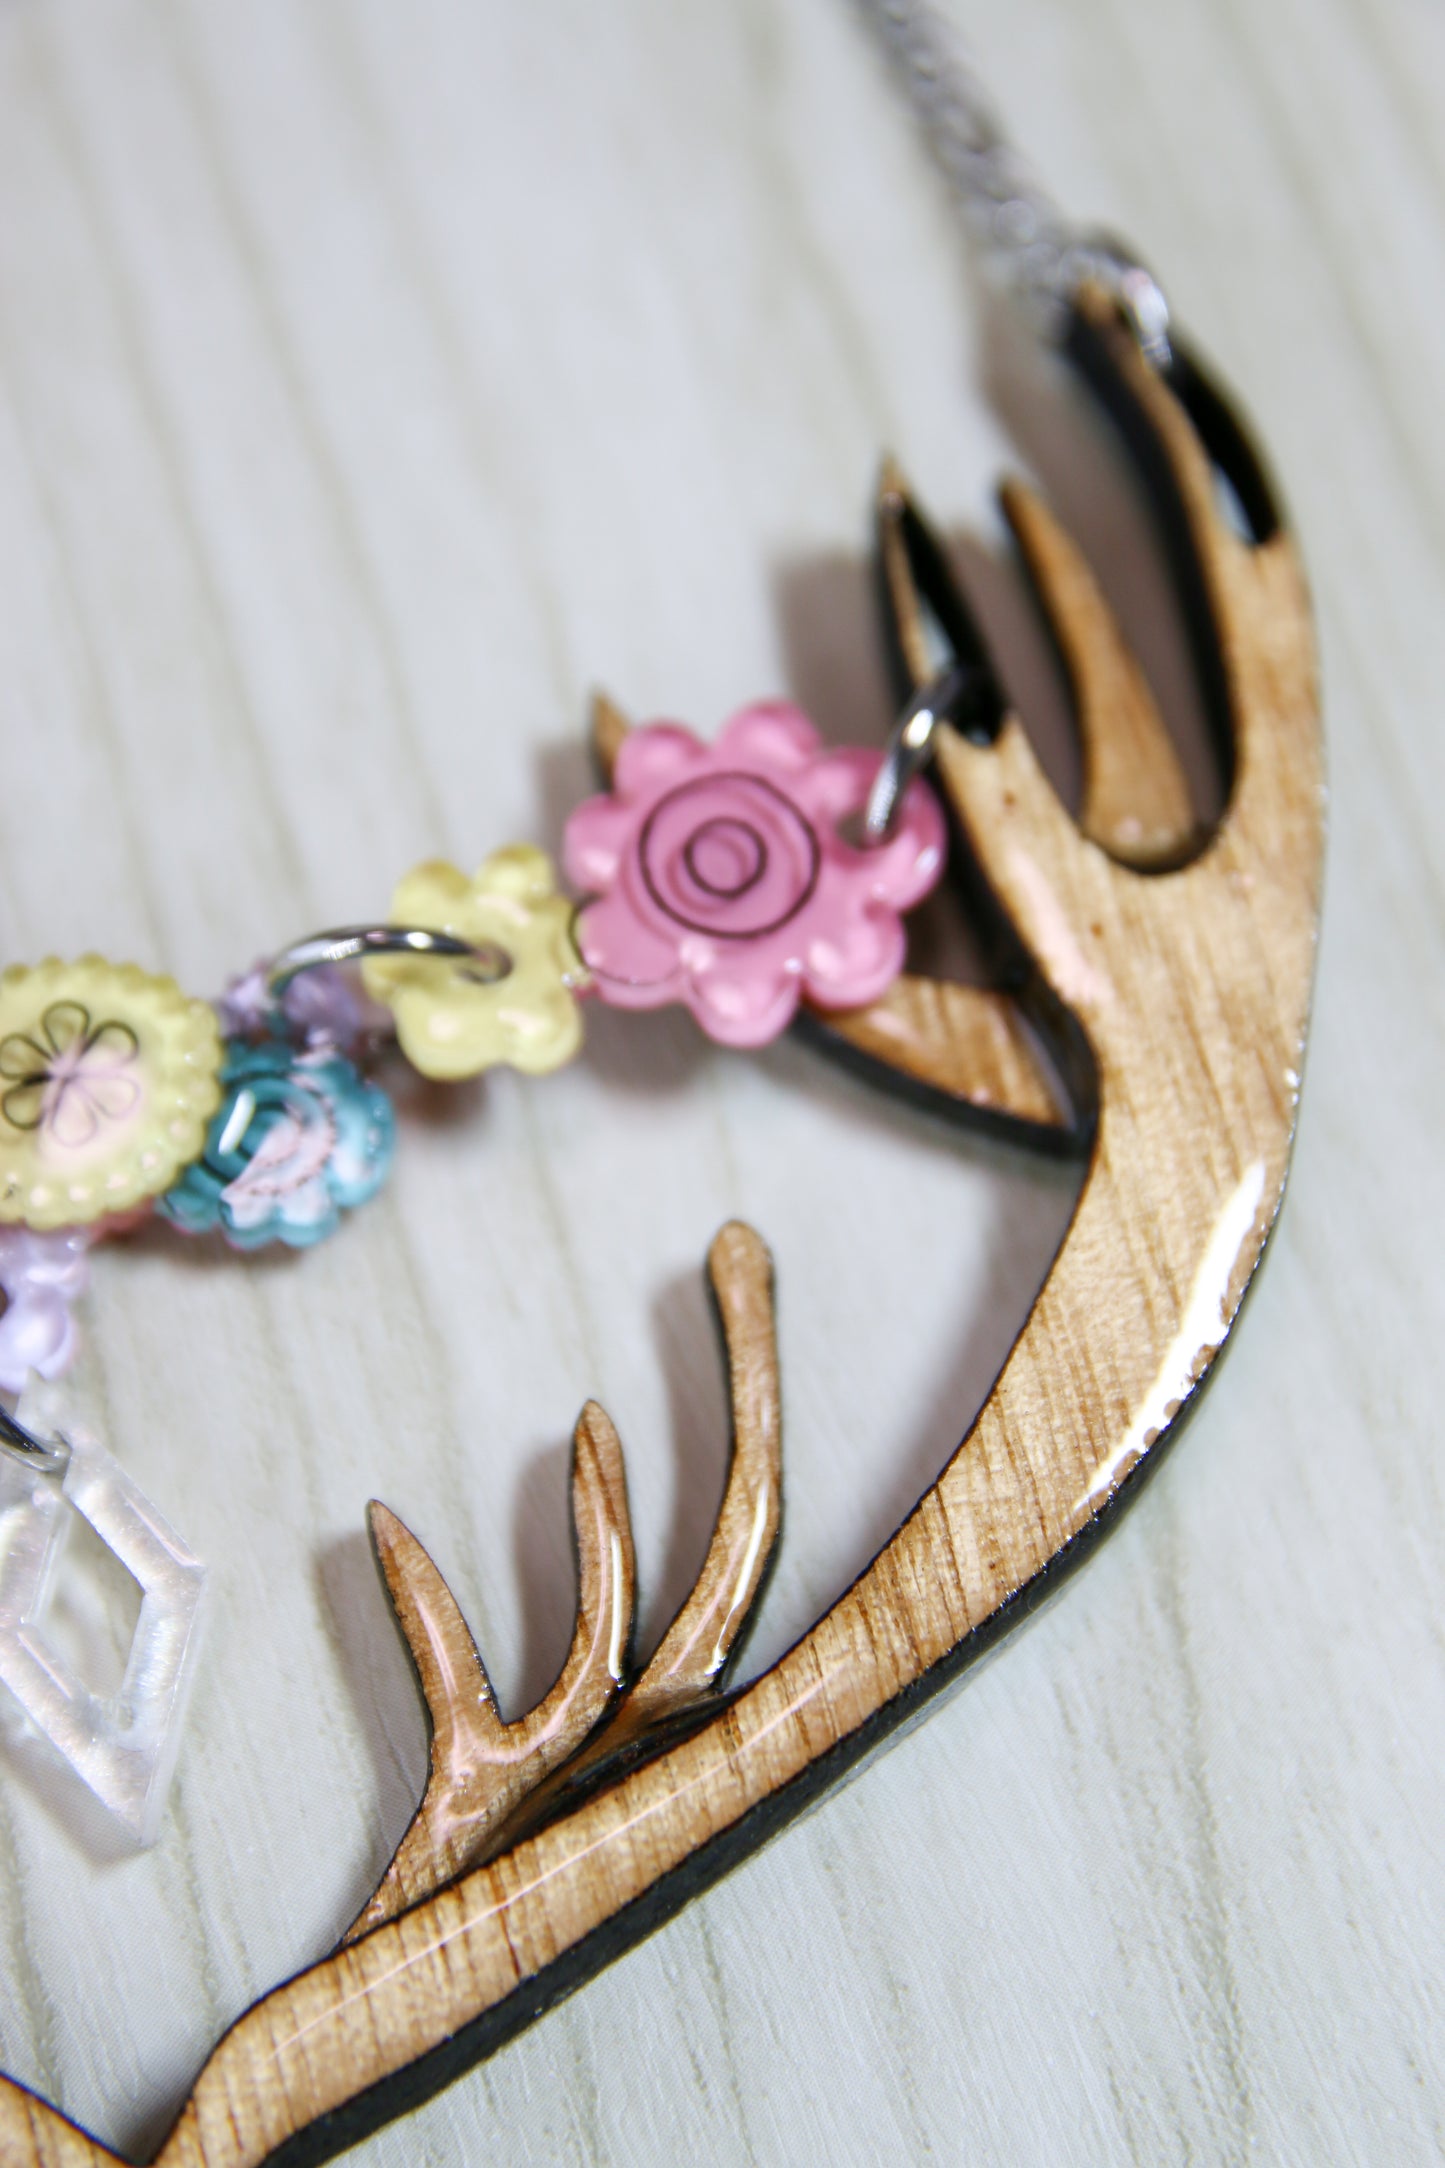 [Limited edition] Spring forest wooden antlers necklace